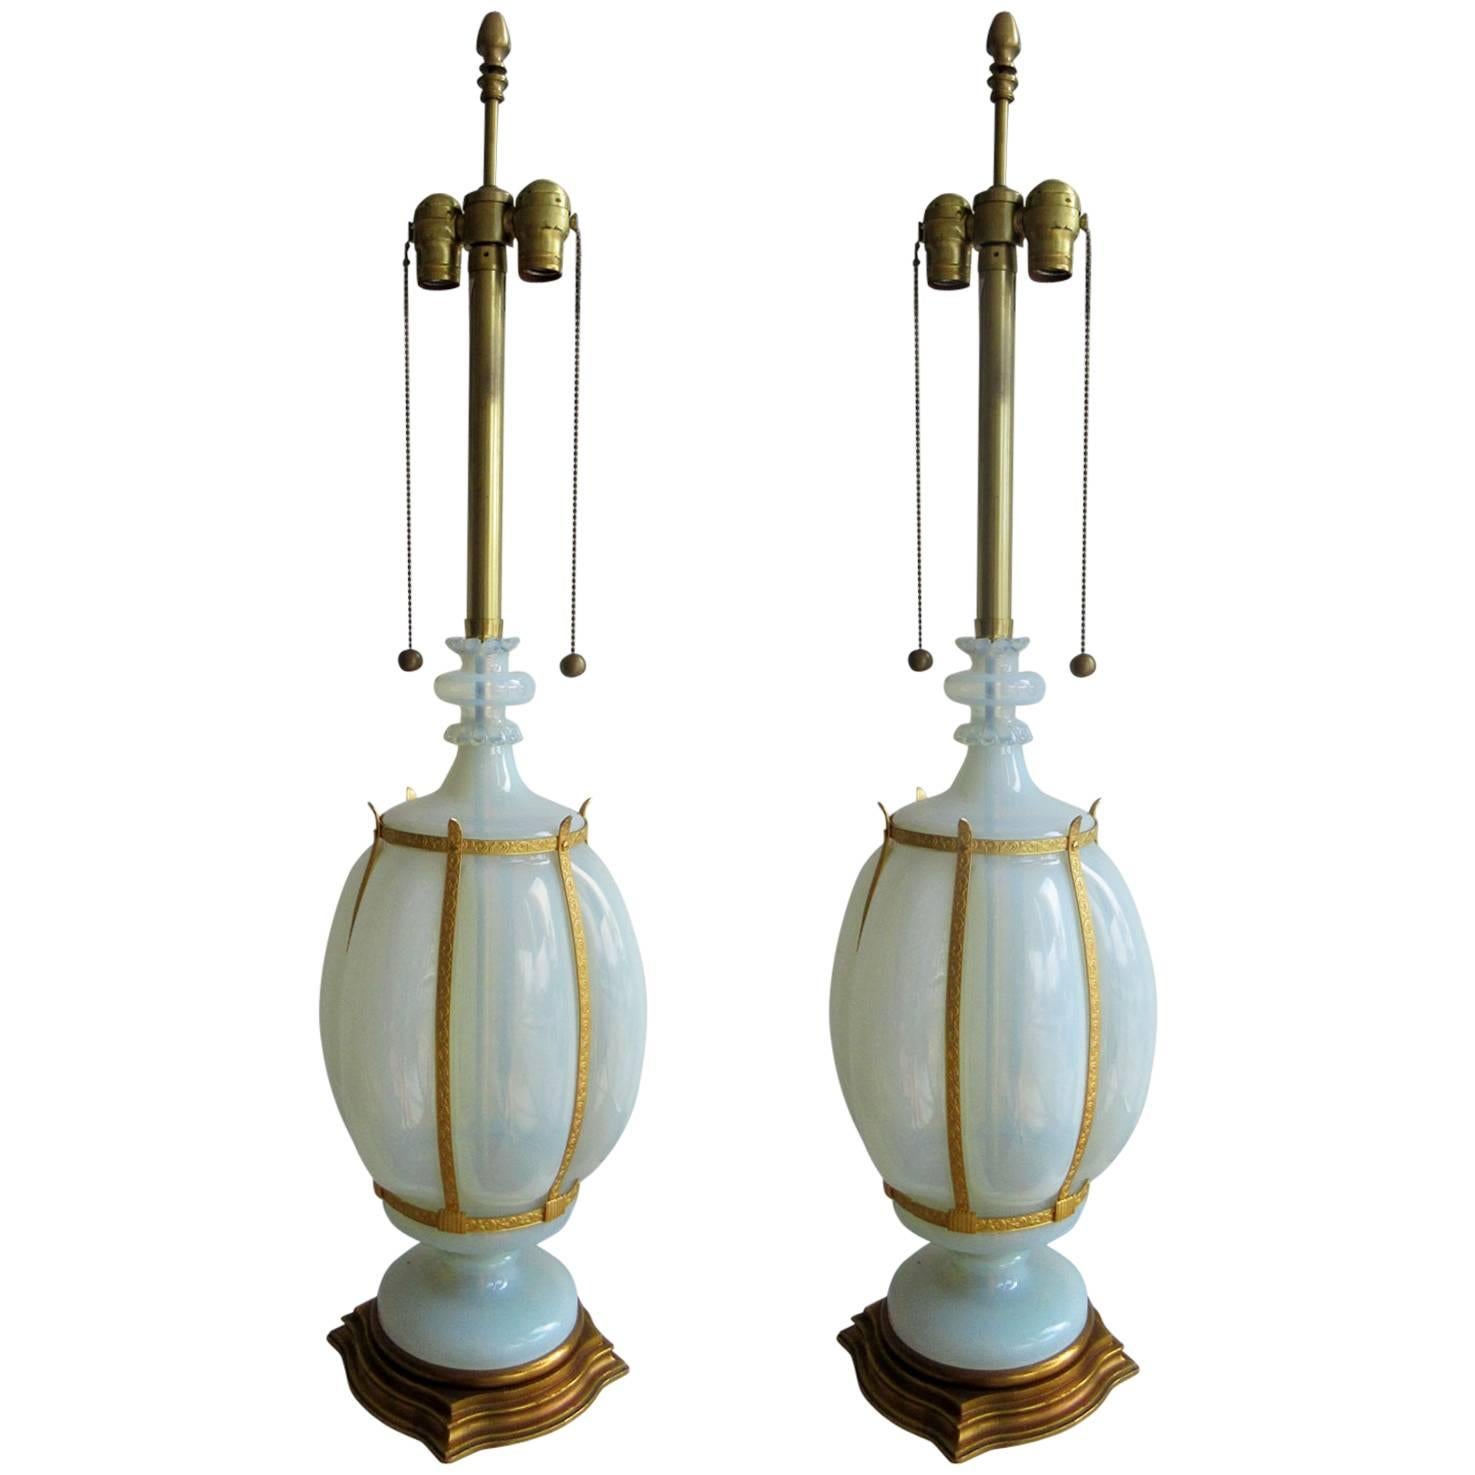 Pair of Vintage Marbro Barovier Opalescent Sky-Blue Lamps For Sale